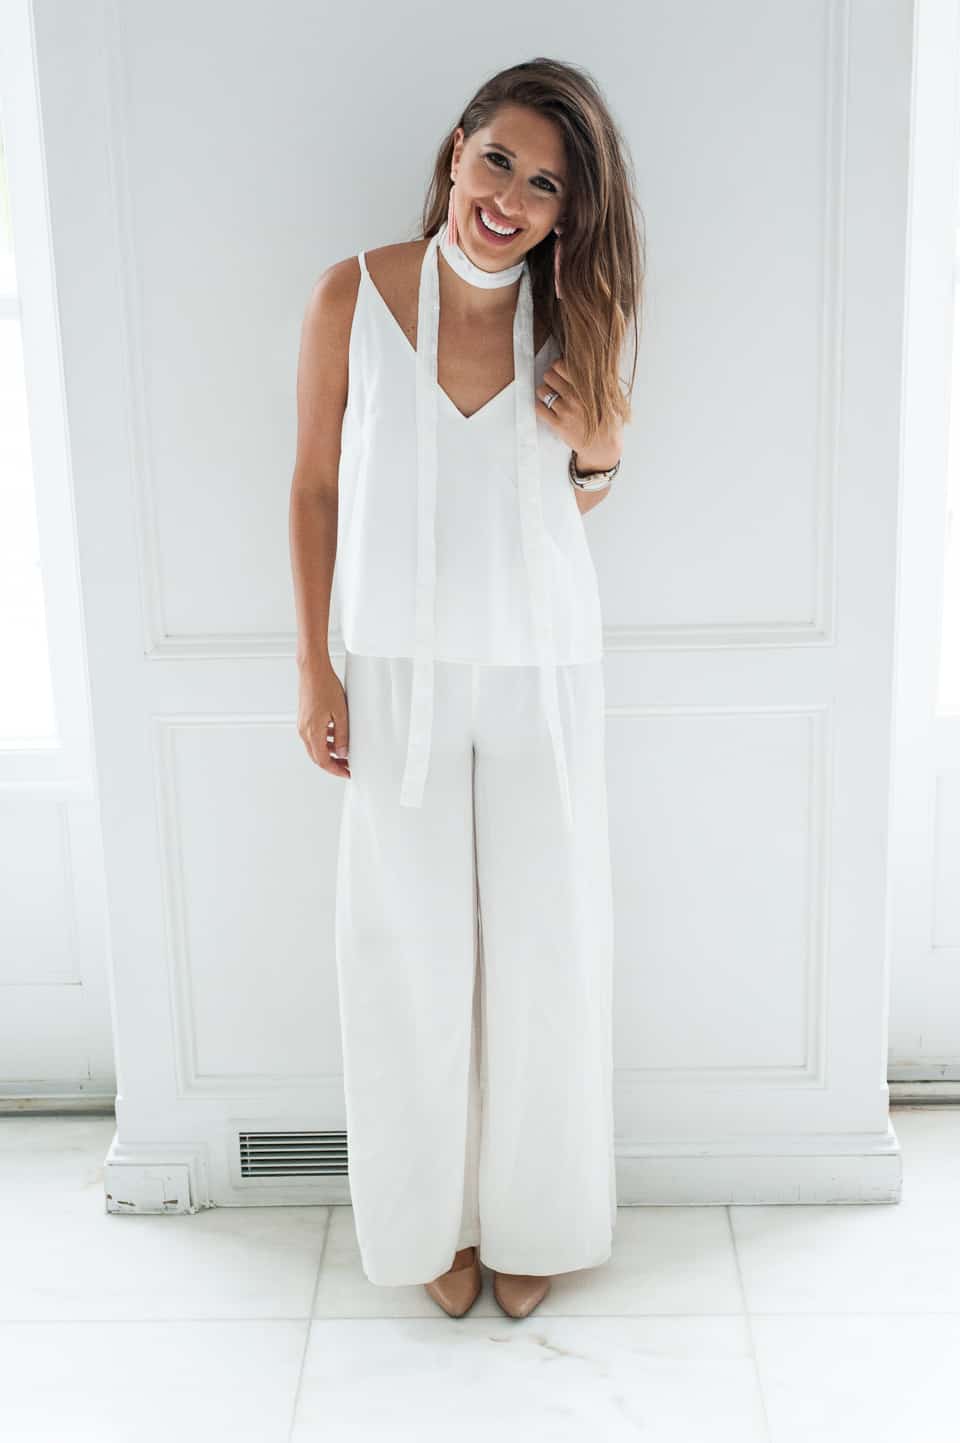 Dress Up Buttercup | Houston Fashion Blog - Dede Raad | White After Labor Day + Sales